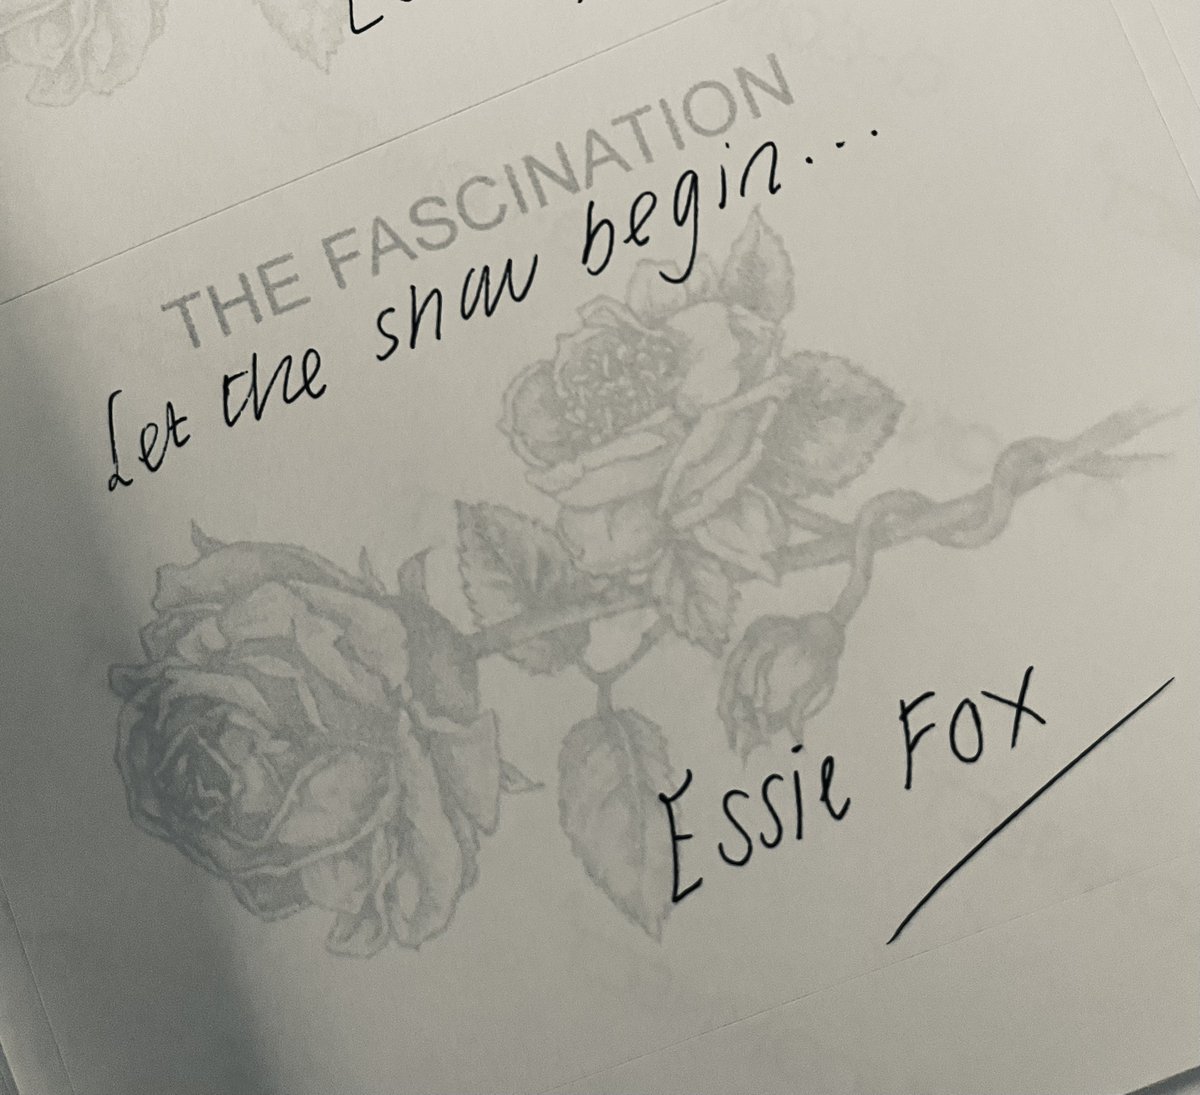 Next week, the paperback of The Fascination will be published. Today I've been signing bookplates ... and there's a hint of the illustrations that will be at the end of every chapter of this new edition. #thefascination #rosered #rosewhite